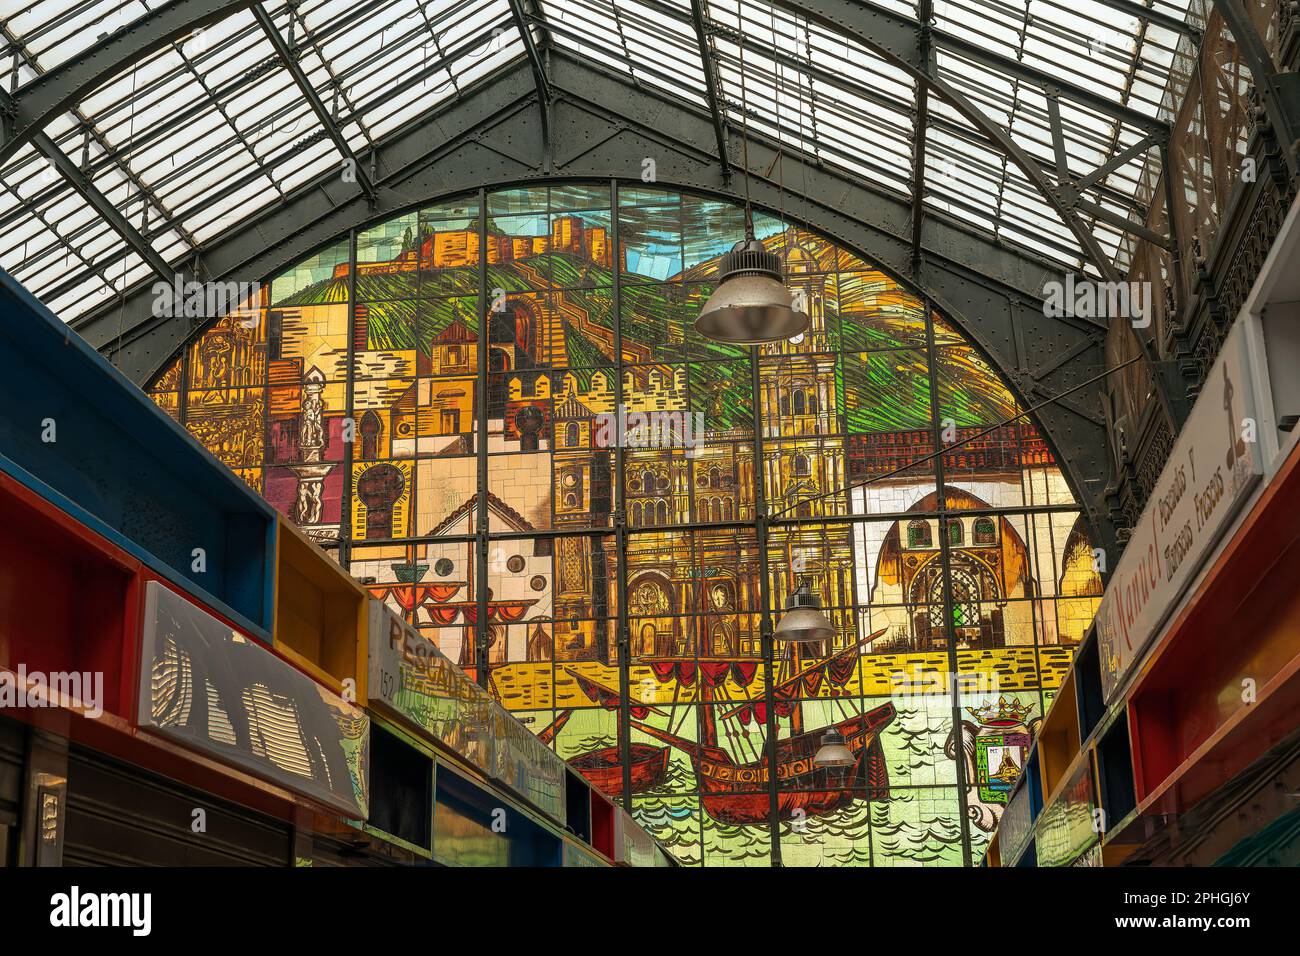 Malaga market in Spain with stained glass window Stock Photo